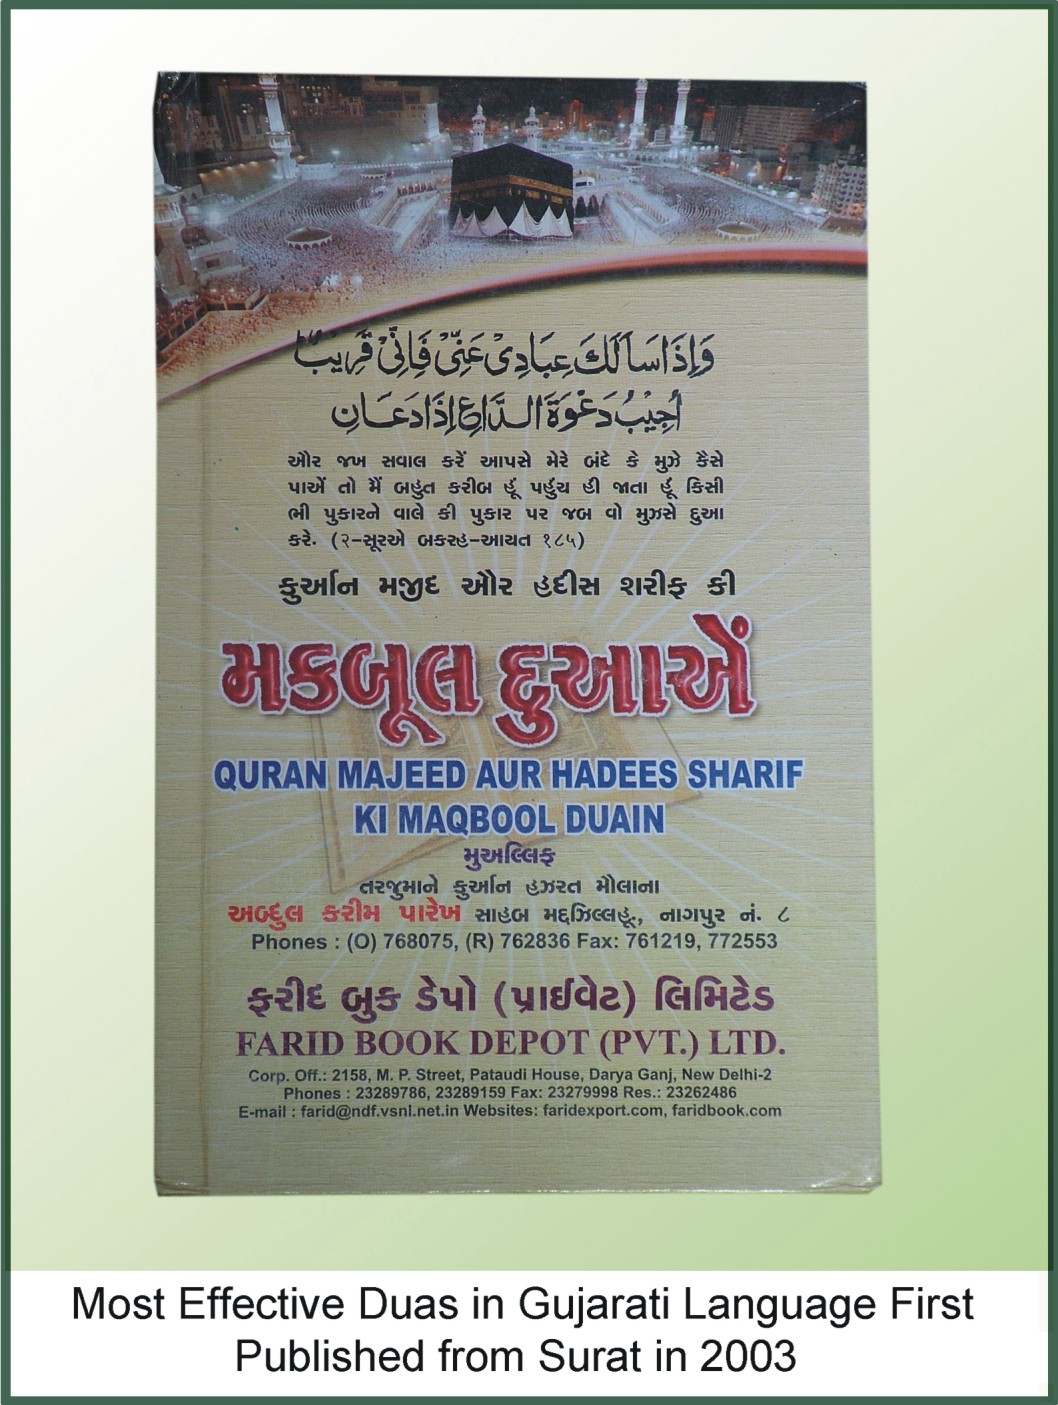 Most Effective Duas (Gujarati) First Published from Surat in 2003